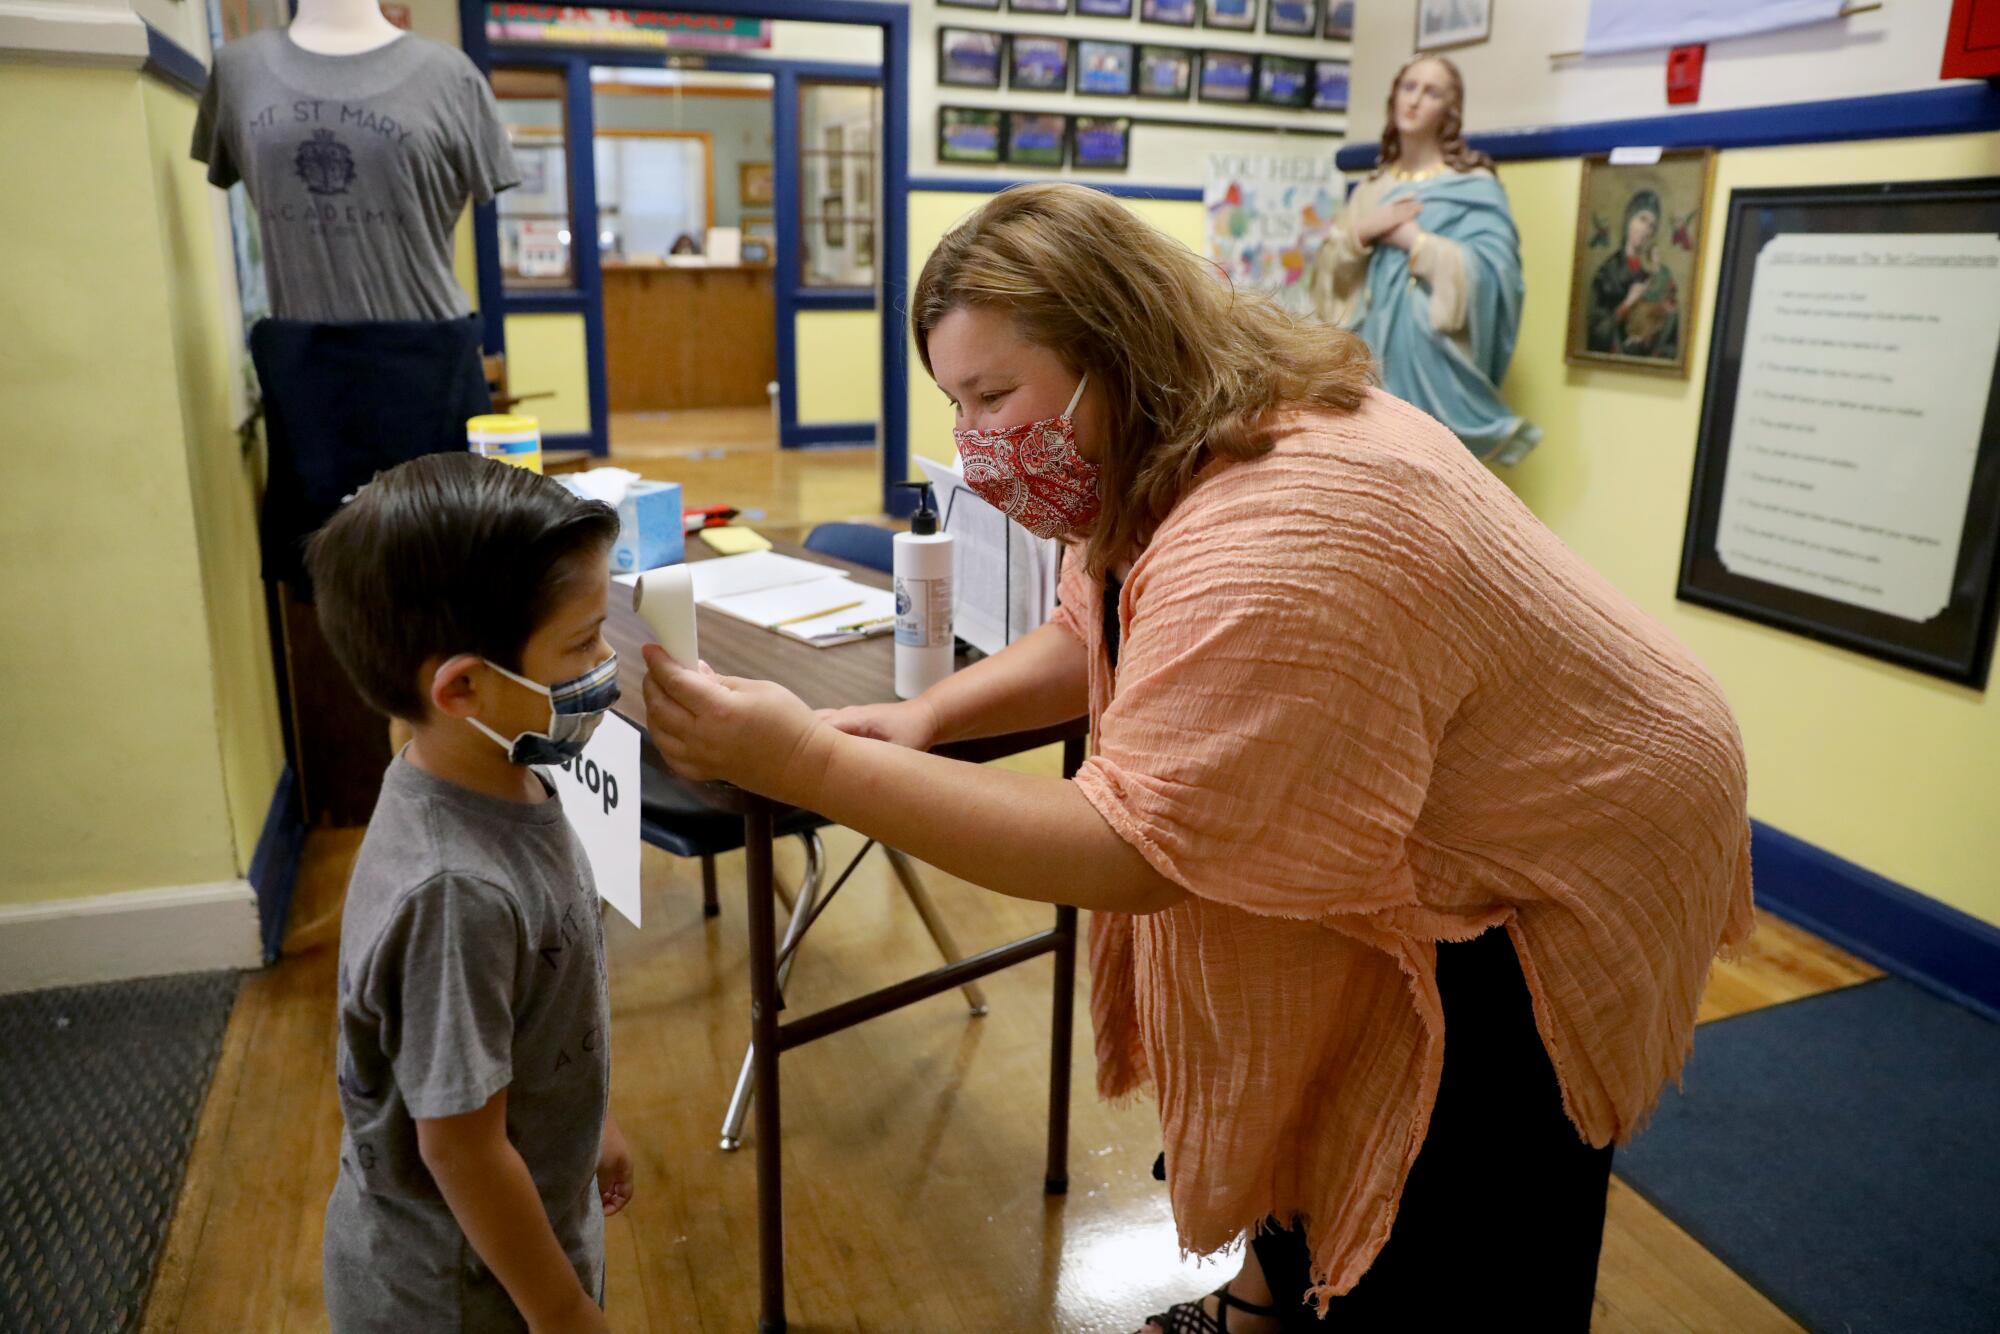 Miles Sirisute, 6, a kindergartner at Mount St. Mary's, has his temperature checked by Principal Edee Wood.